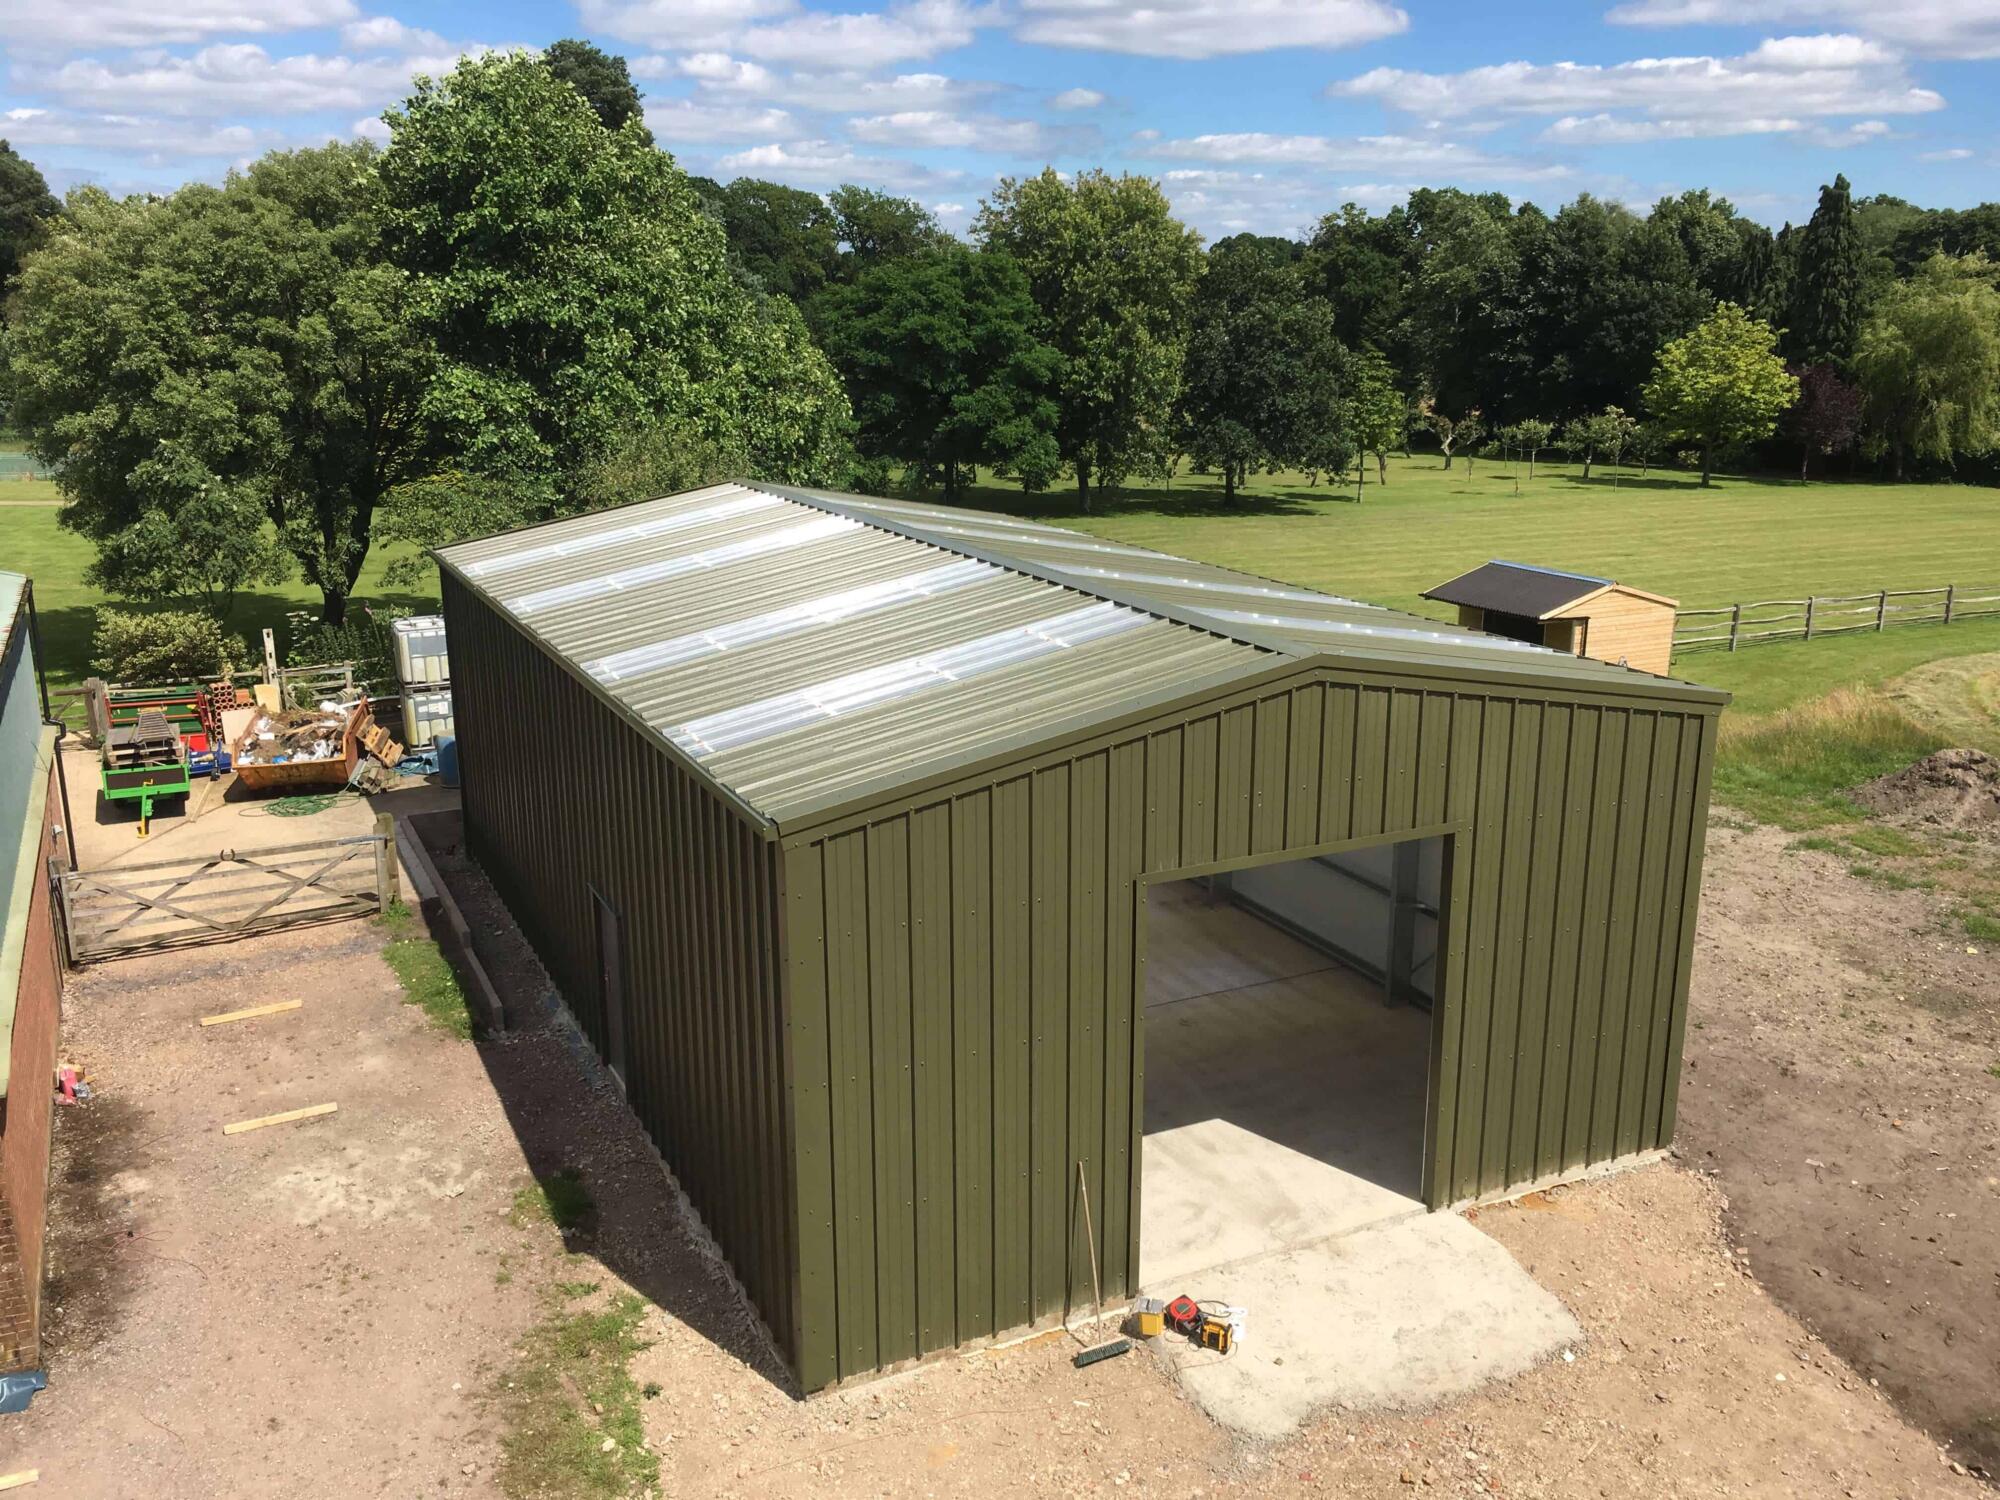 An aerial view of a green shed in a field constructed with steel buildings.